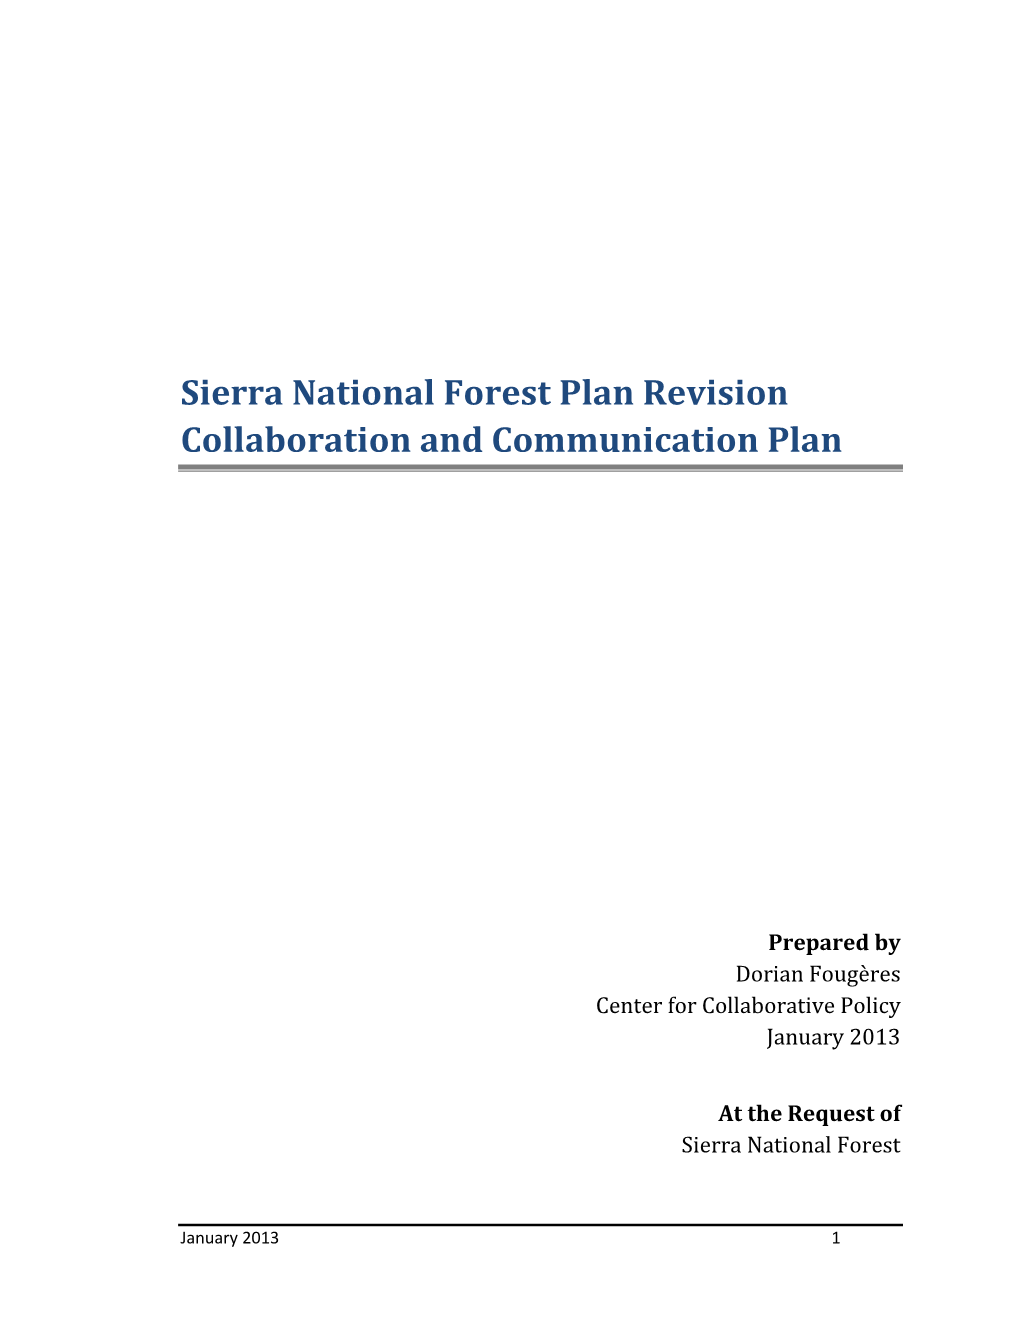 Sierra National Forest Plan Revision Collaboration and Communication Plan